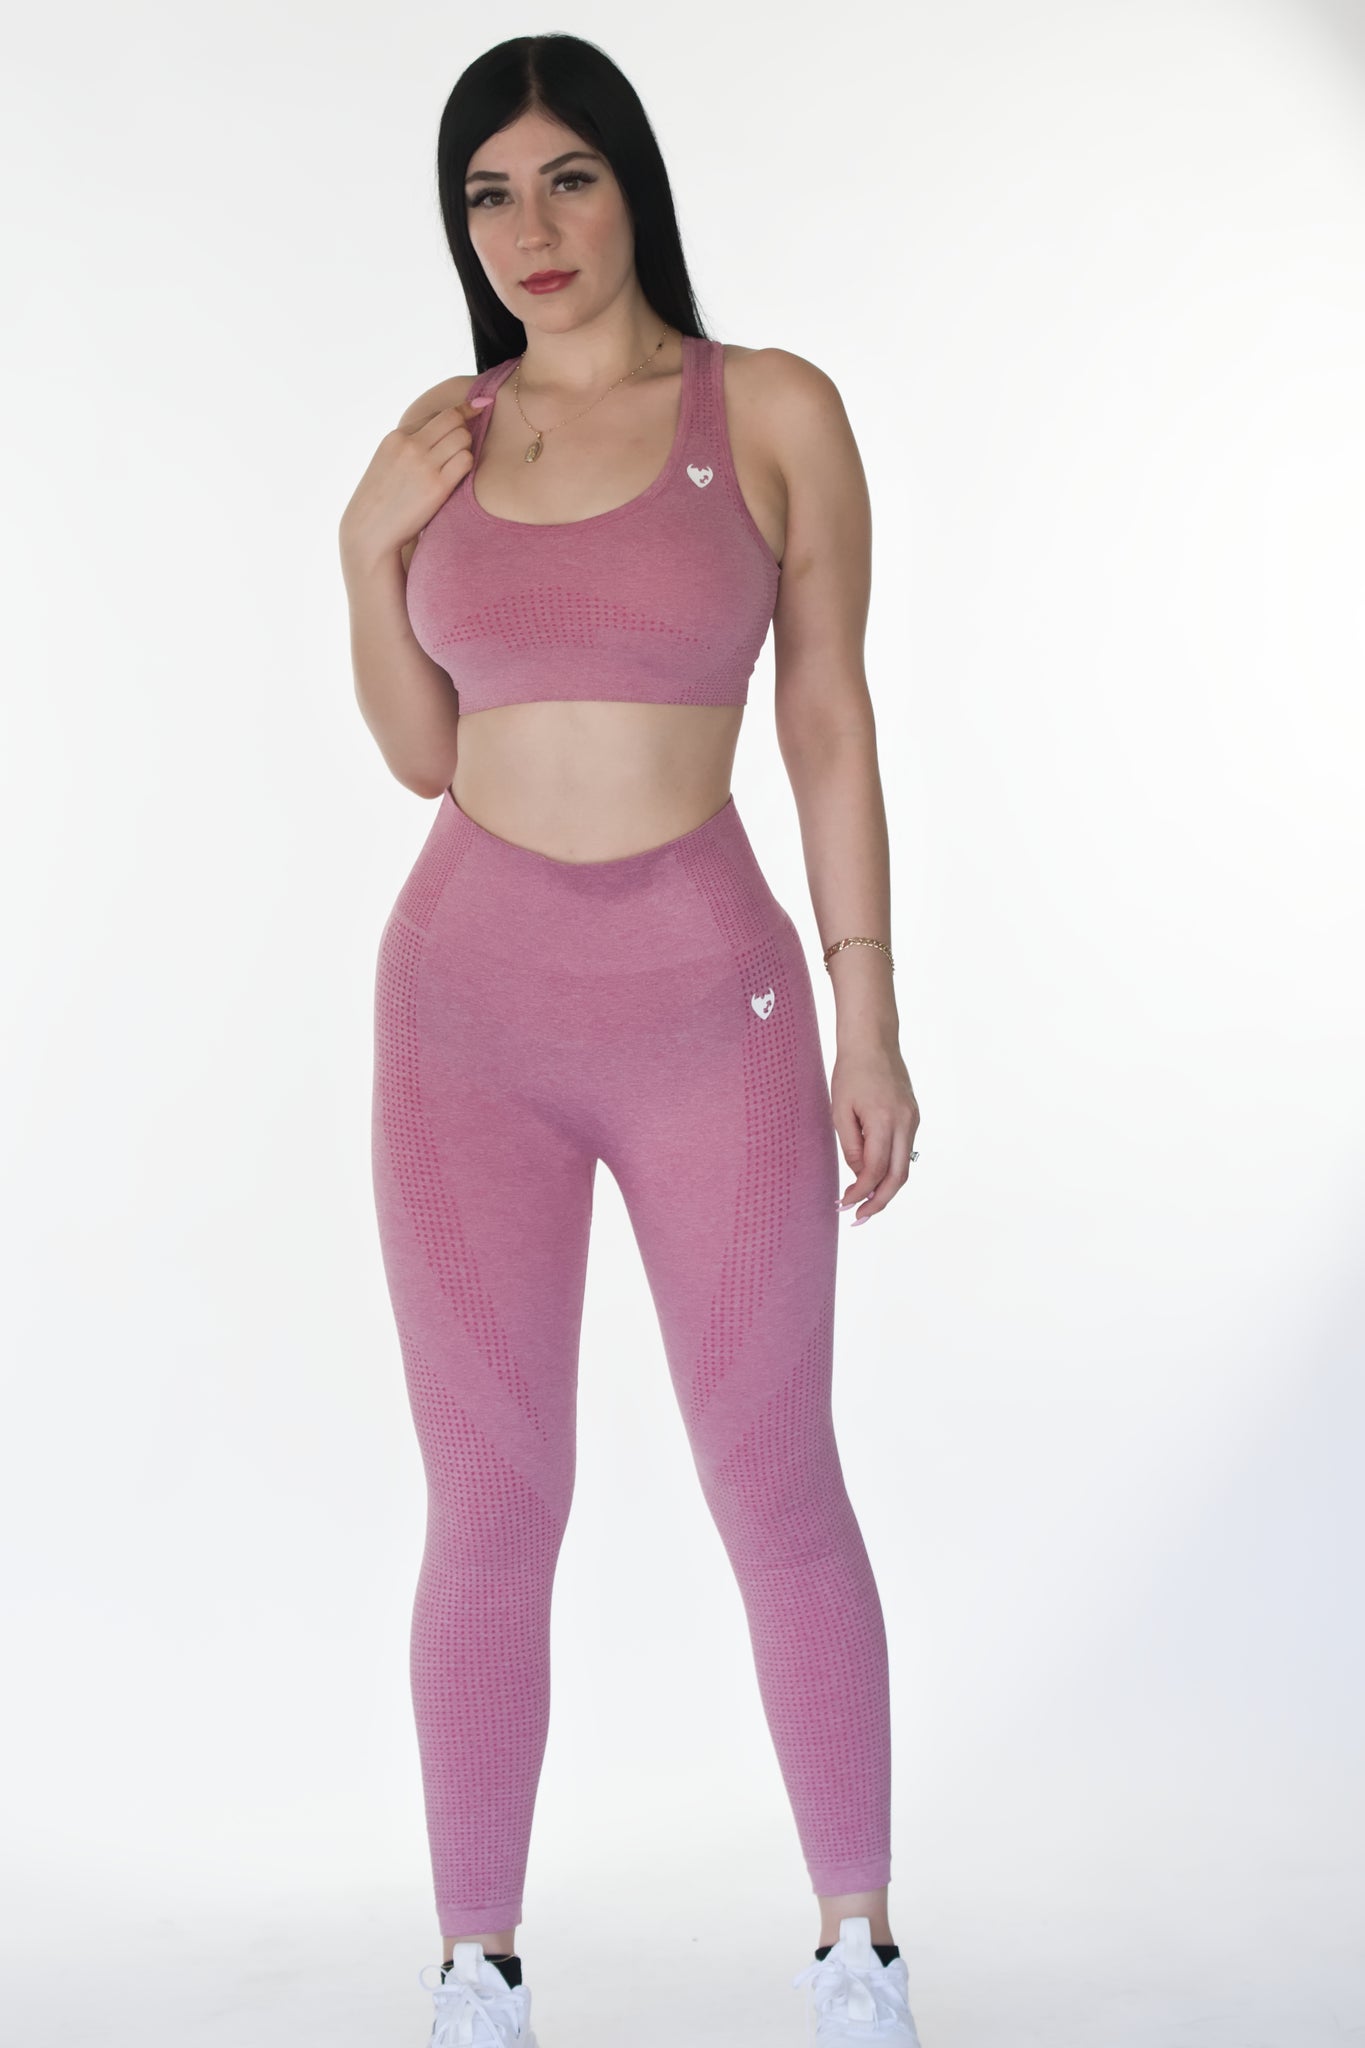 Pretty in PINK! 🎀 Sporty Sheek Barbie Inspired Leggings. Best gym gear  sportswear pants perfect for yoga, gym, and fitness activity �